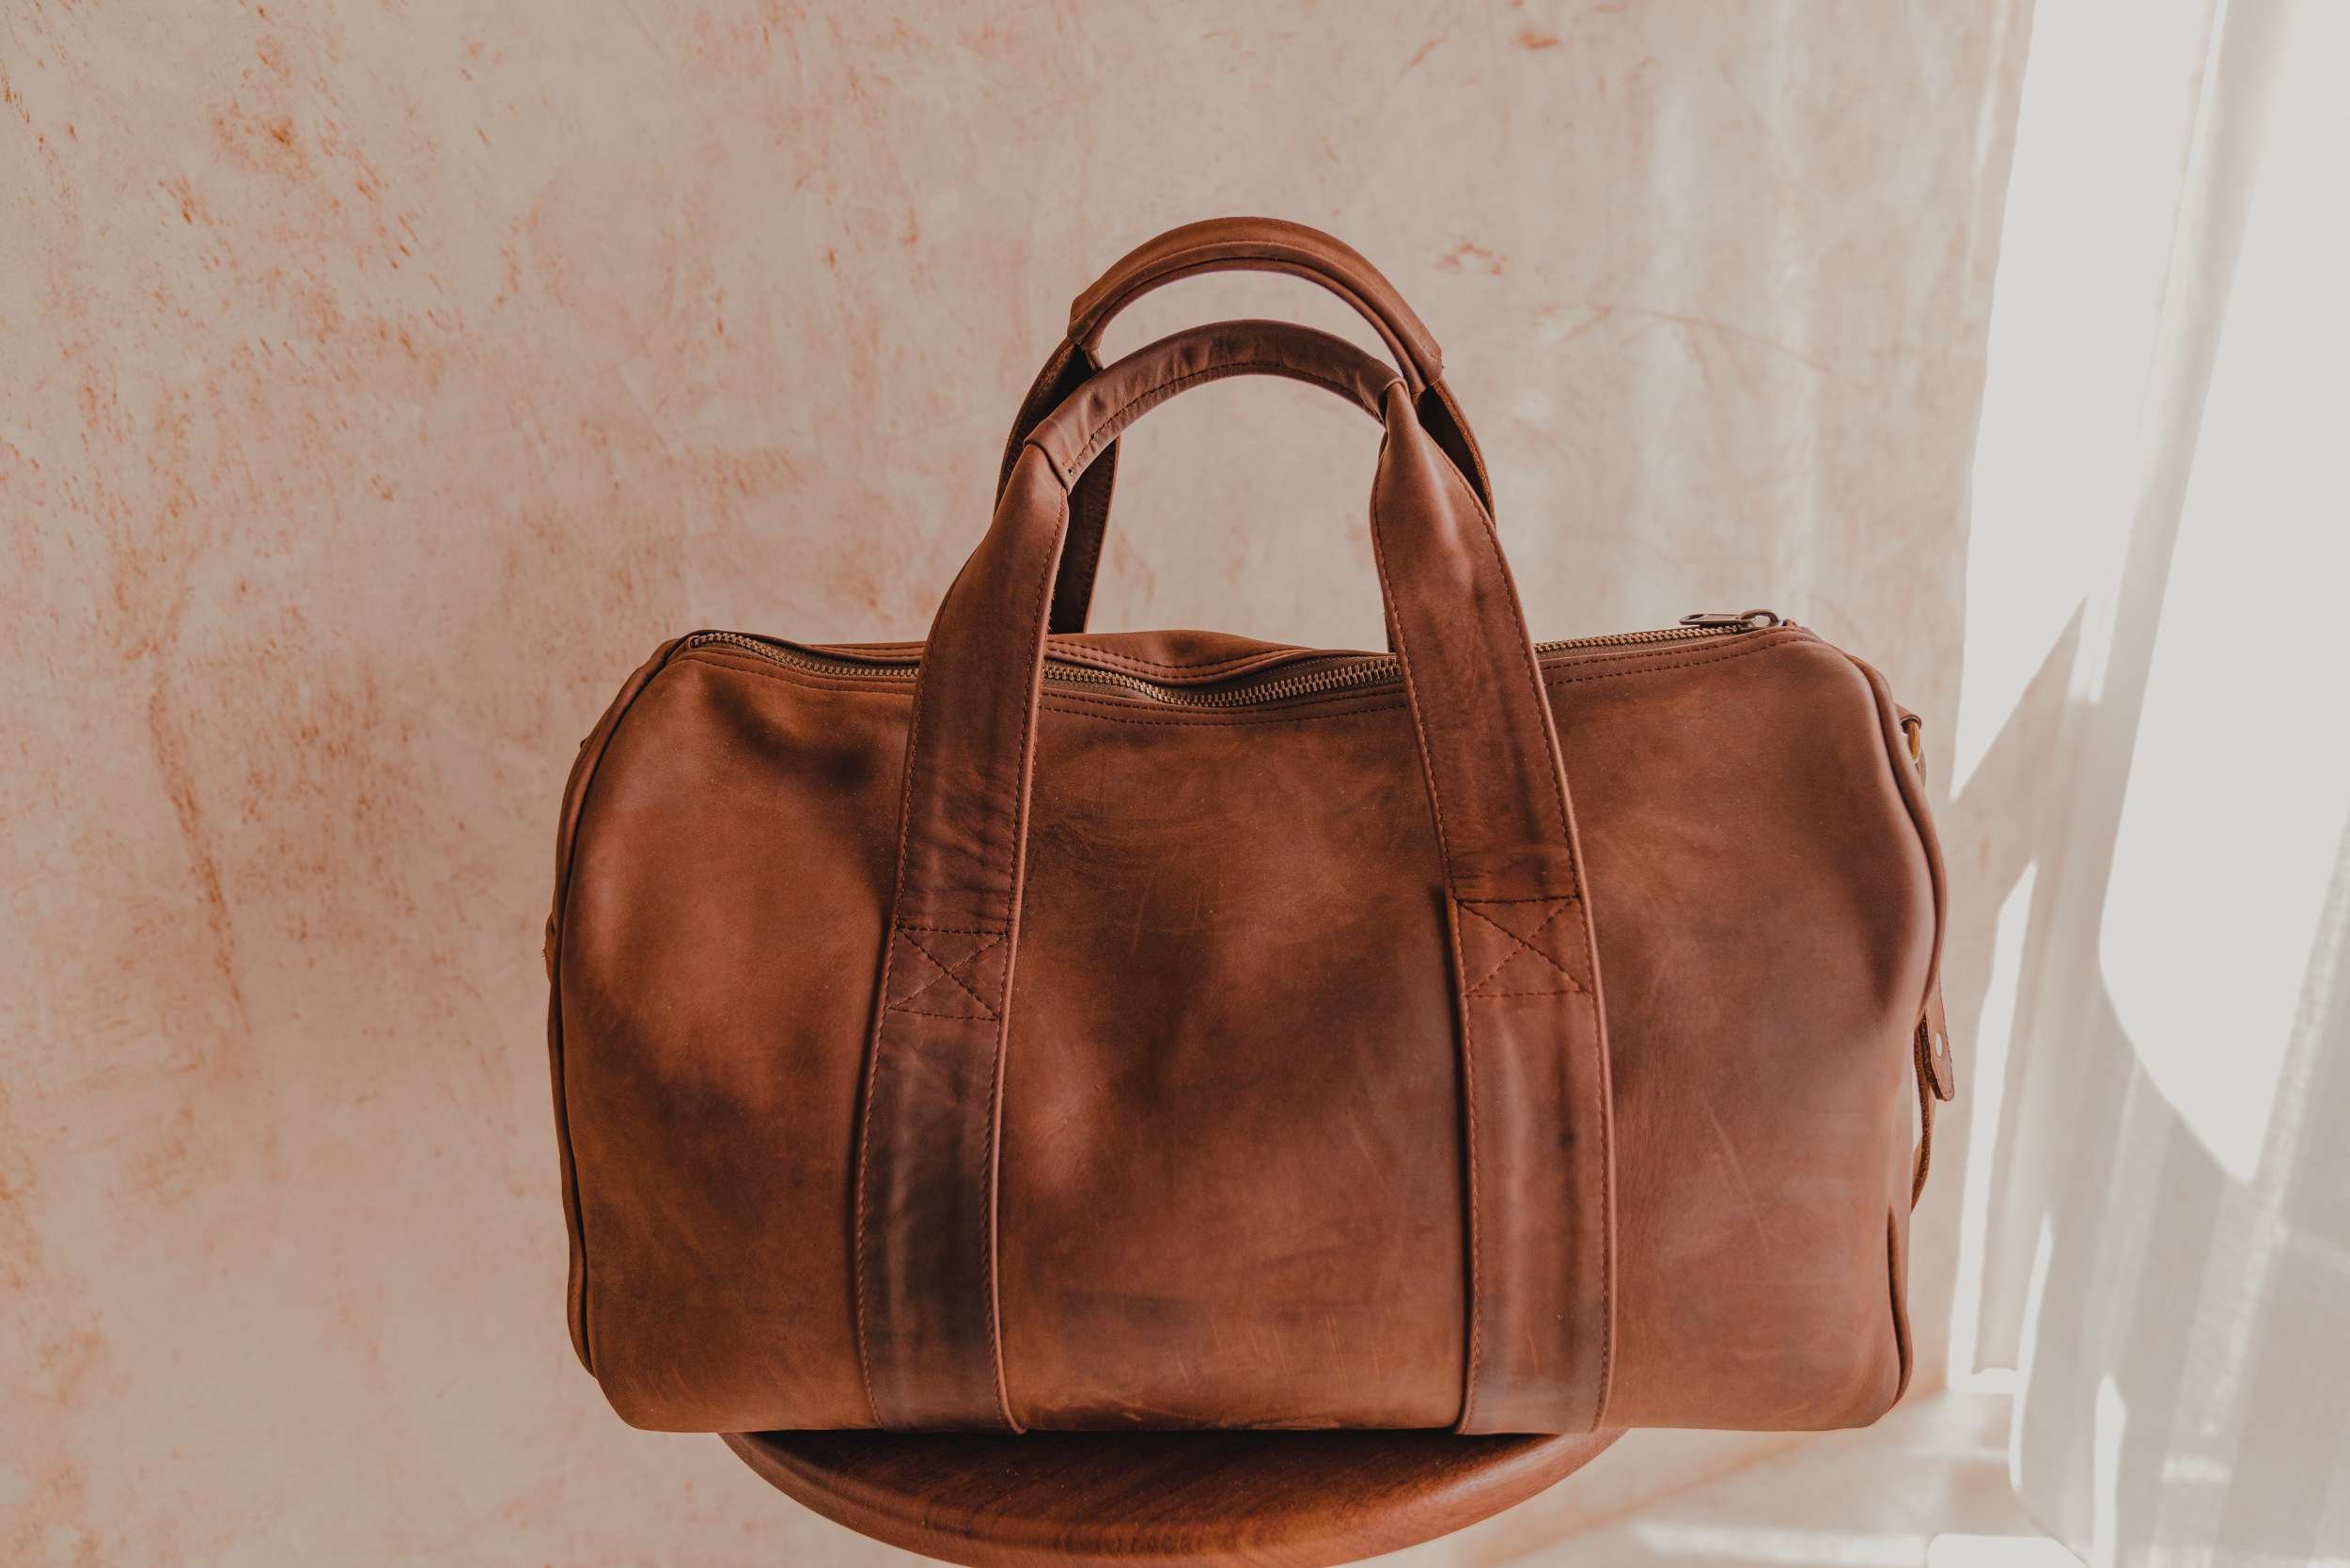 A custom made leather travel bag made by an Urban Change Lab artisan.